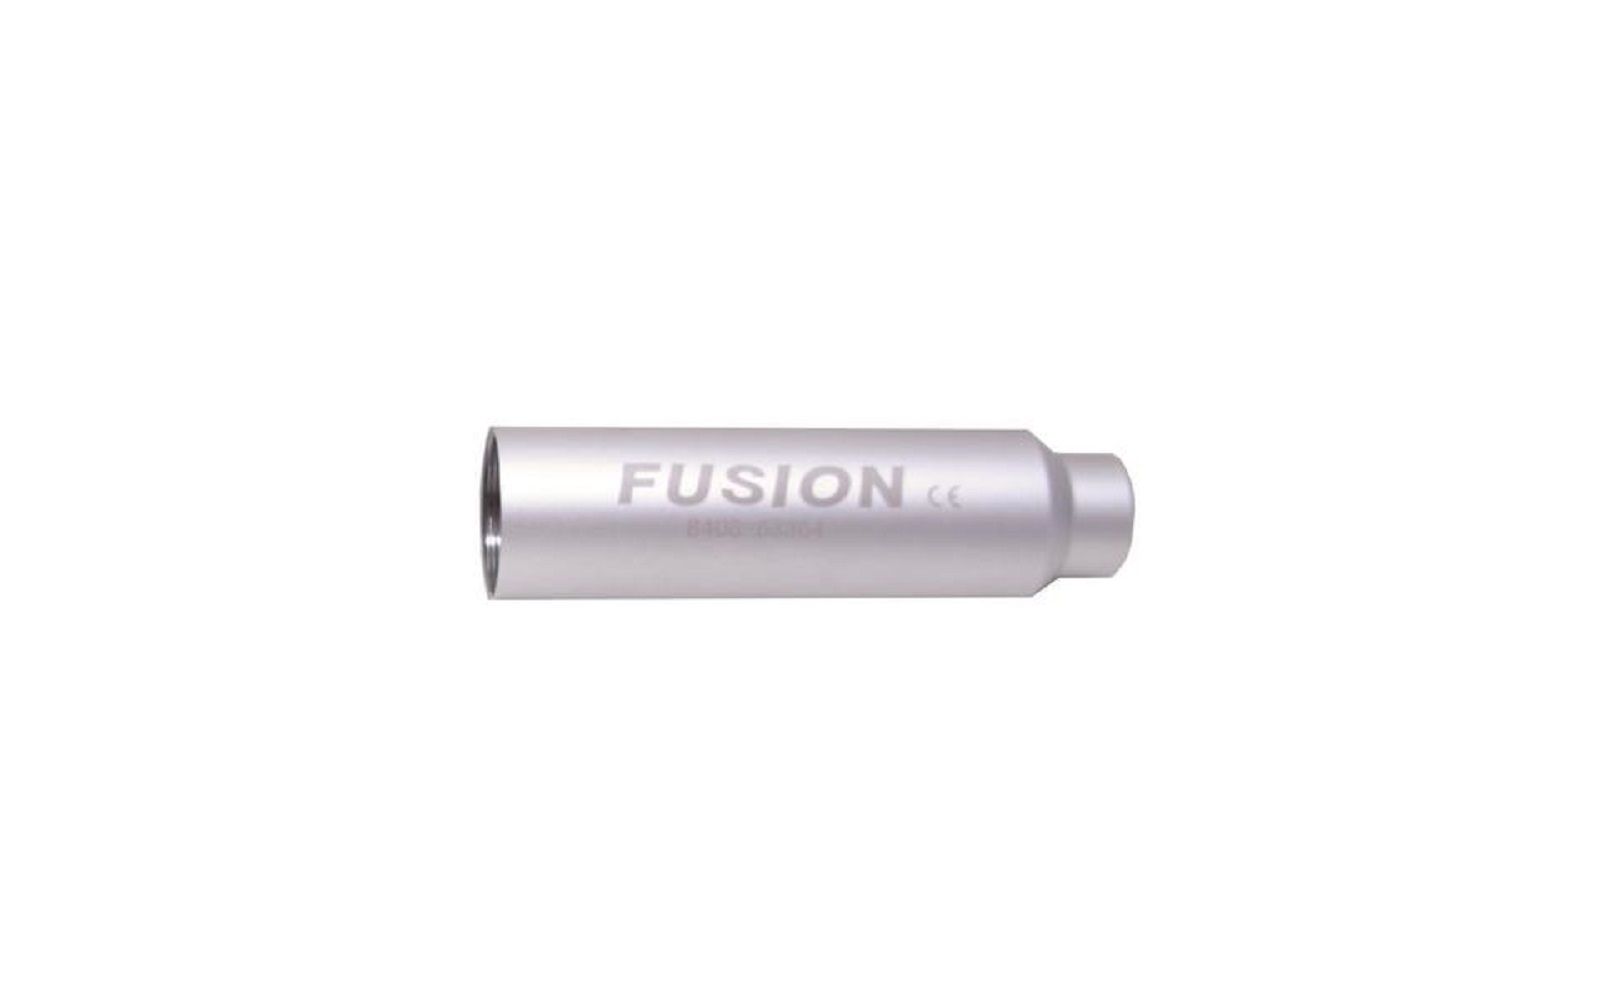 Fusion curing light battery assembly